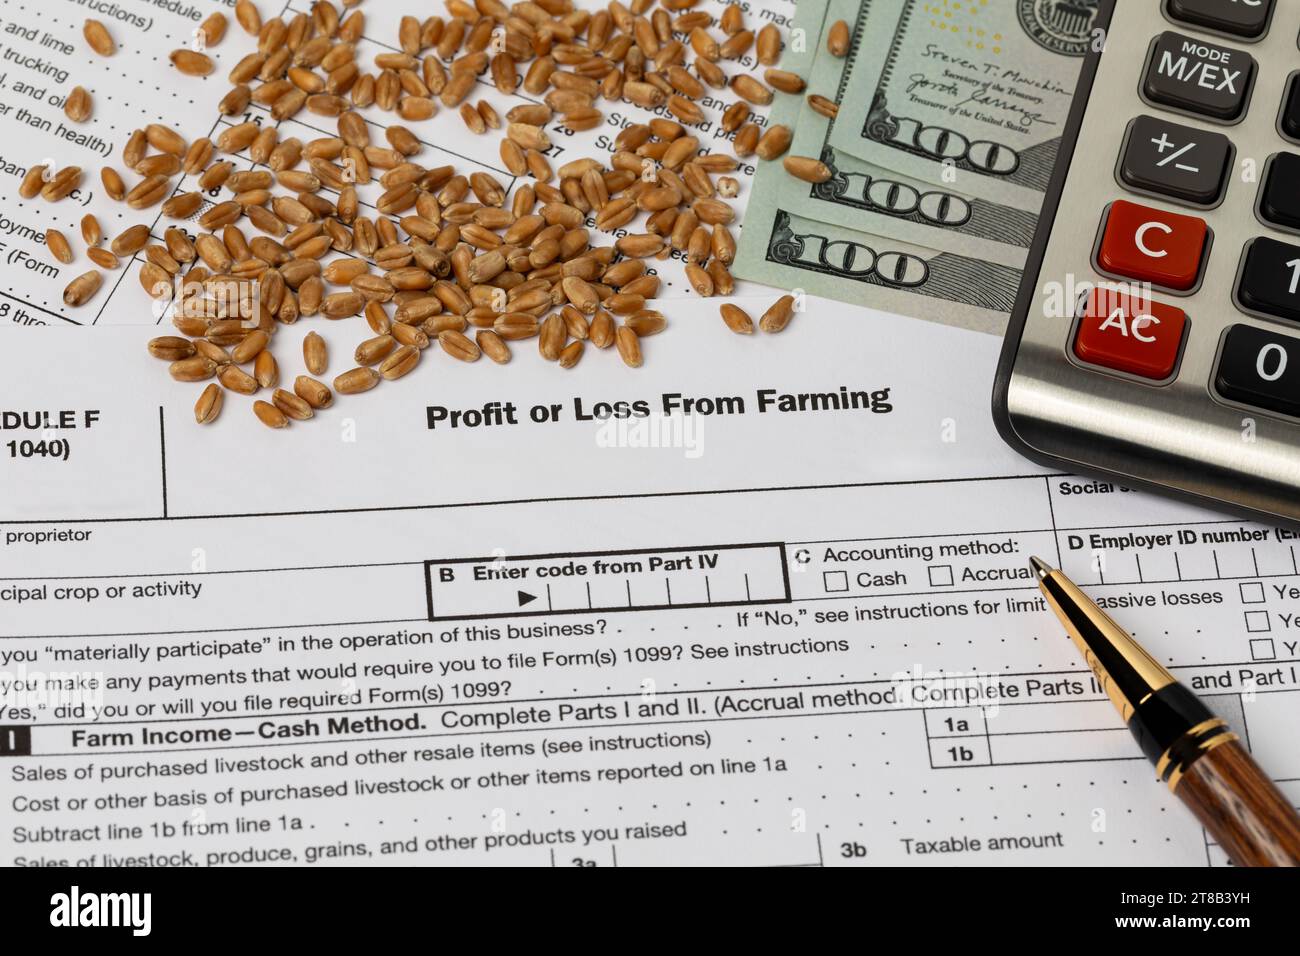 Wheat seed and farm tax form. Farming income, finances and management concept. Stock Photo